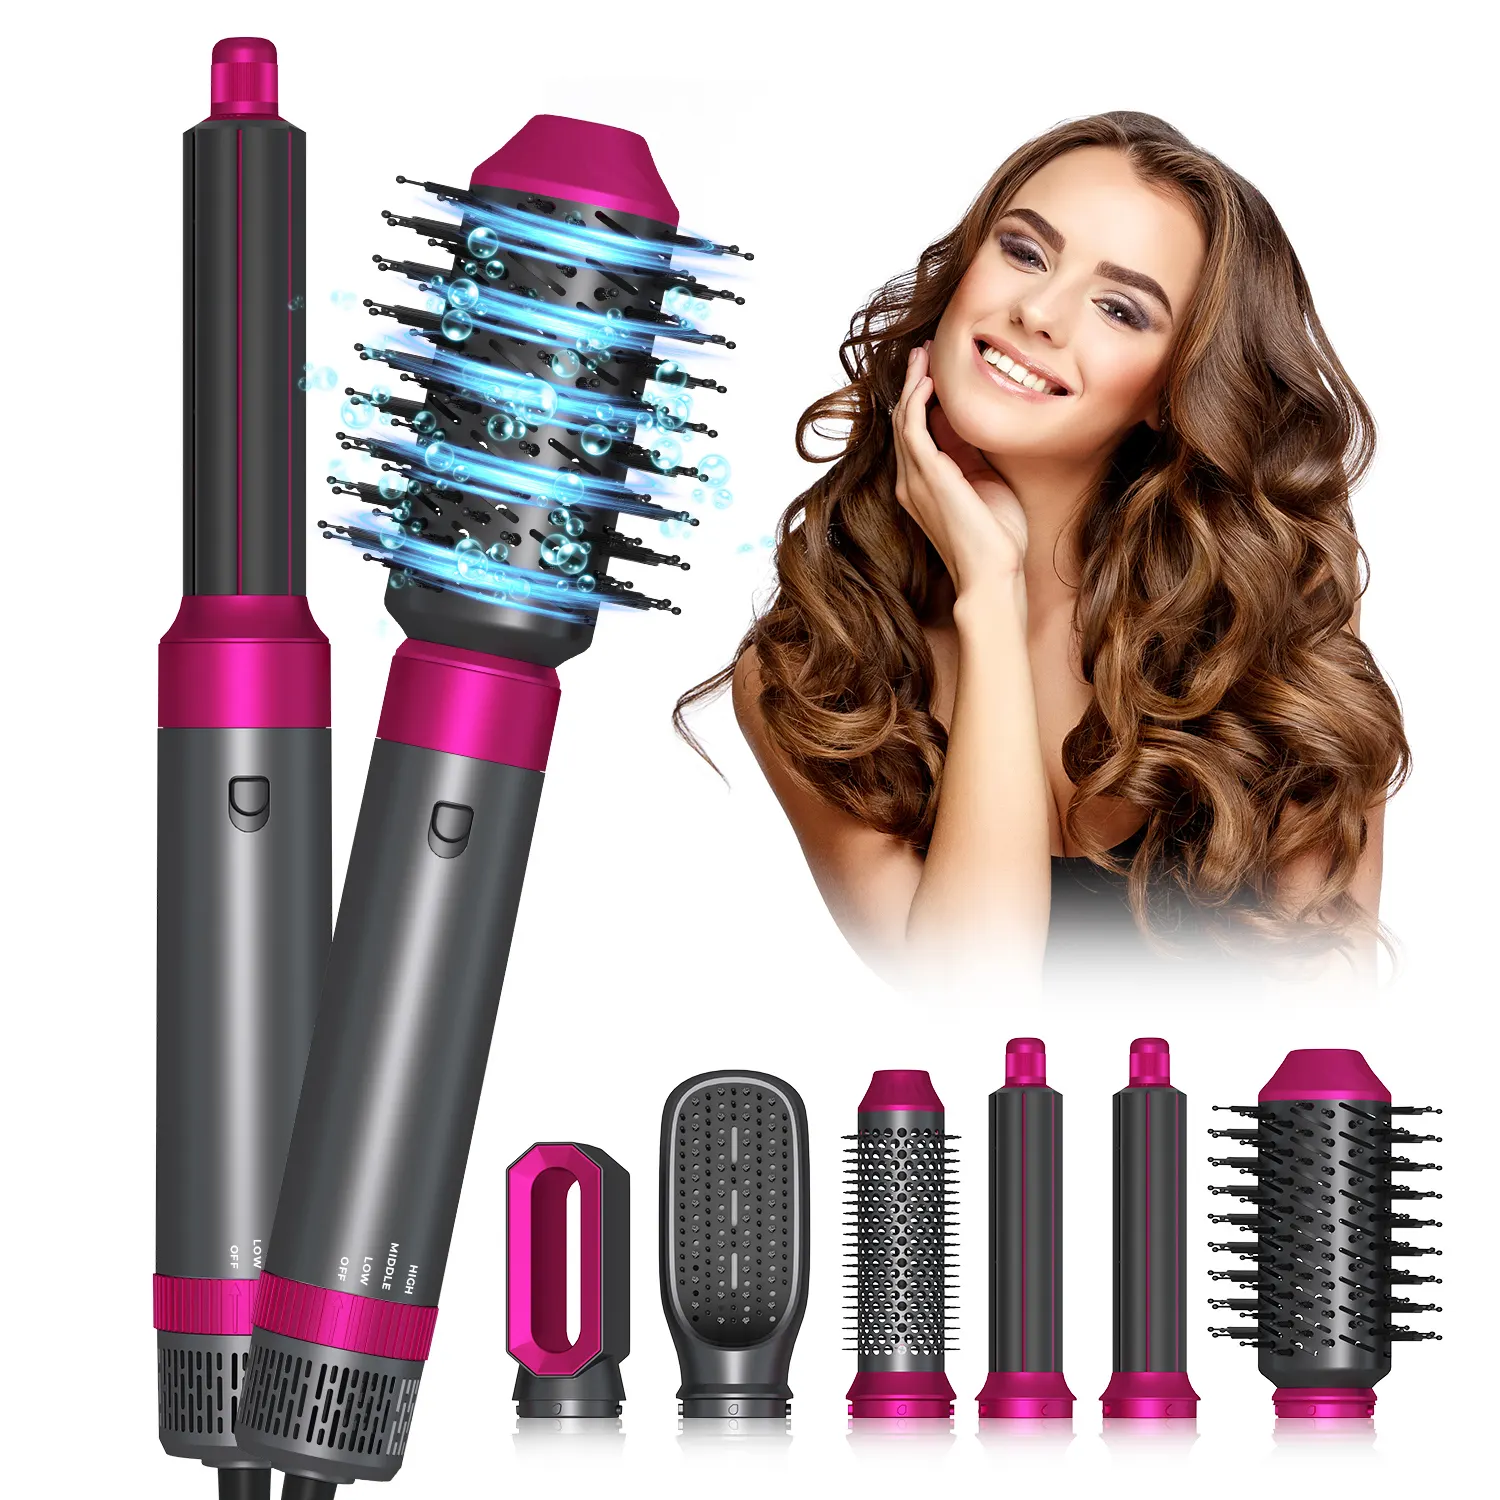 Hot Air comb Curler One Step Hair Dryer Styler Negative Ion Hair Dryer 5 in 1 Hair Styler Brush